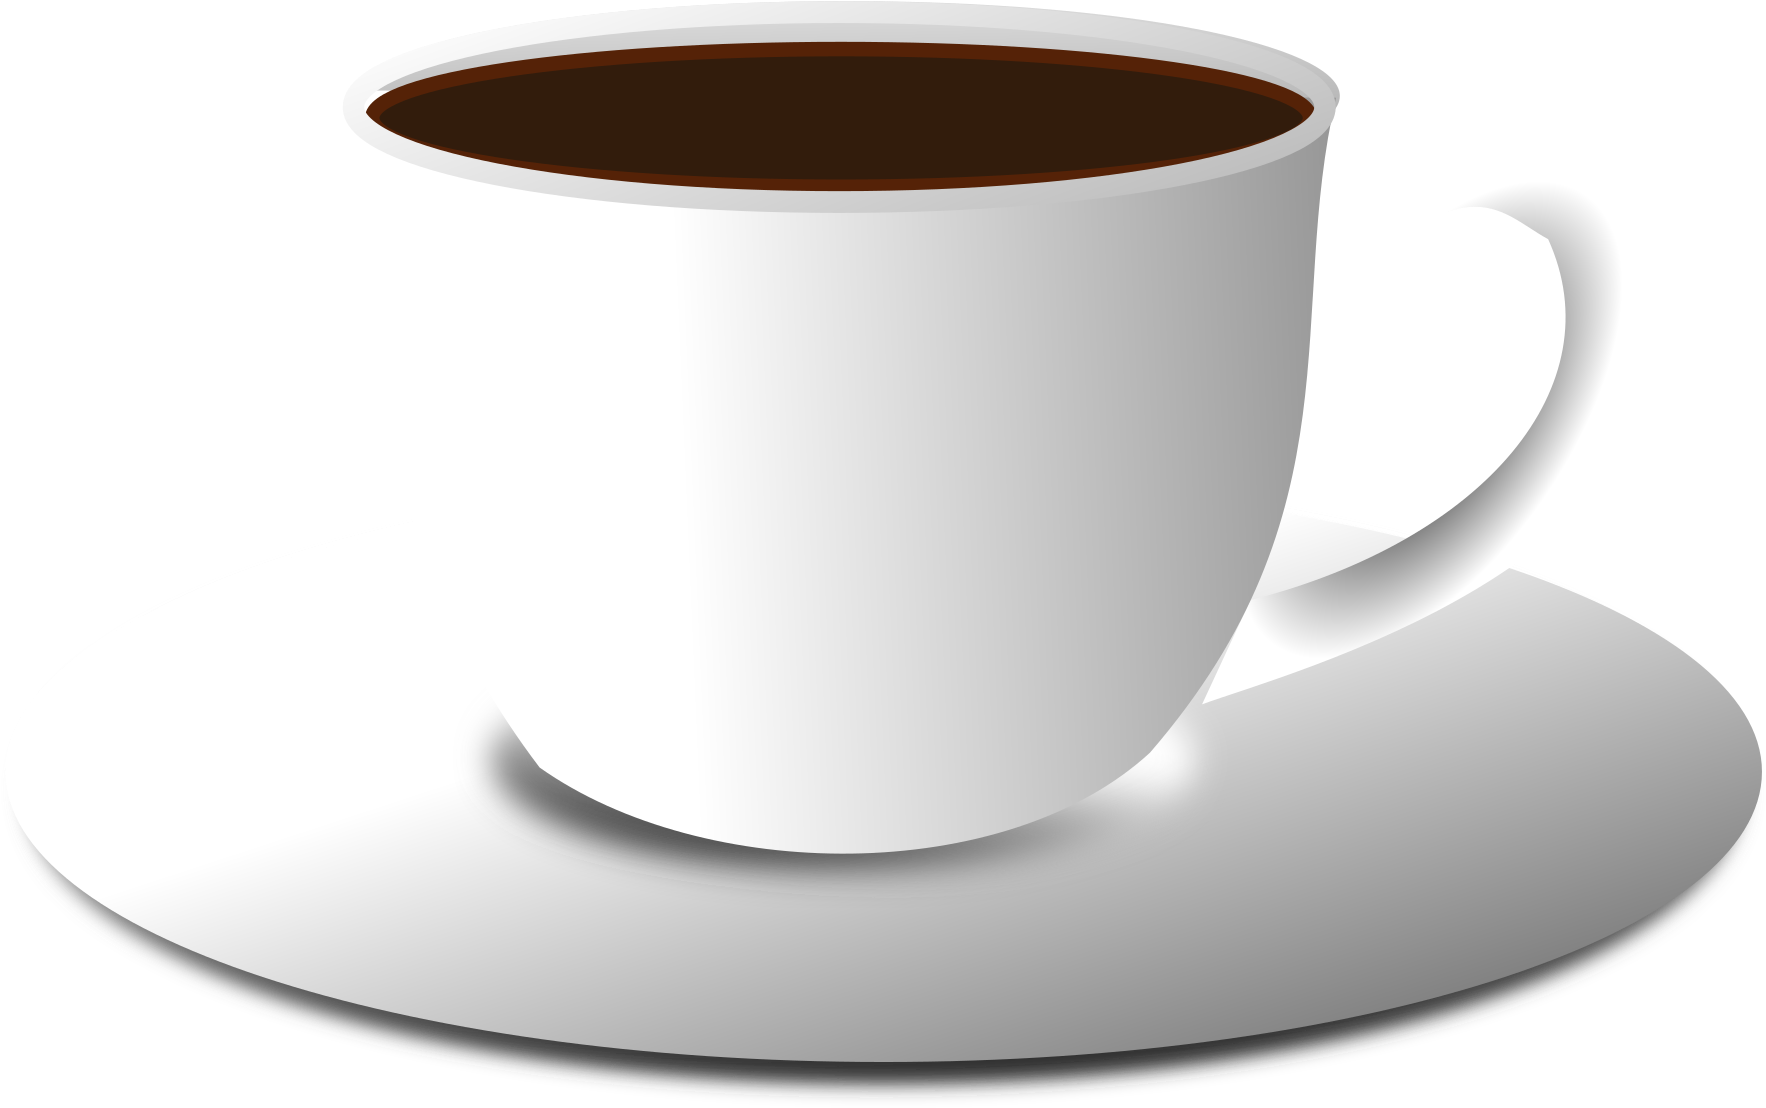 White Coffee Cupon Saucer PNG image